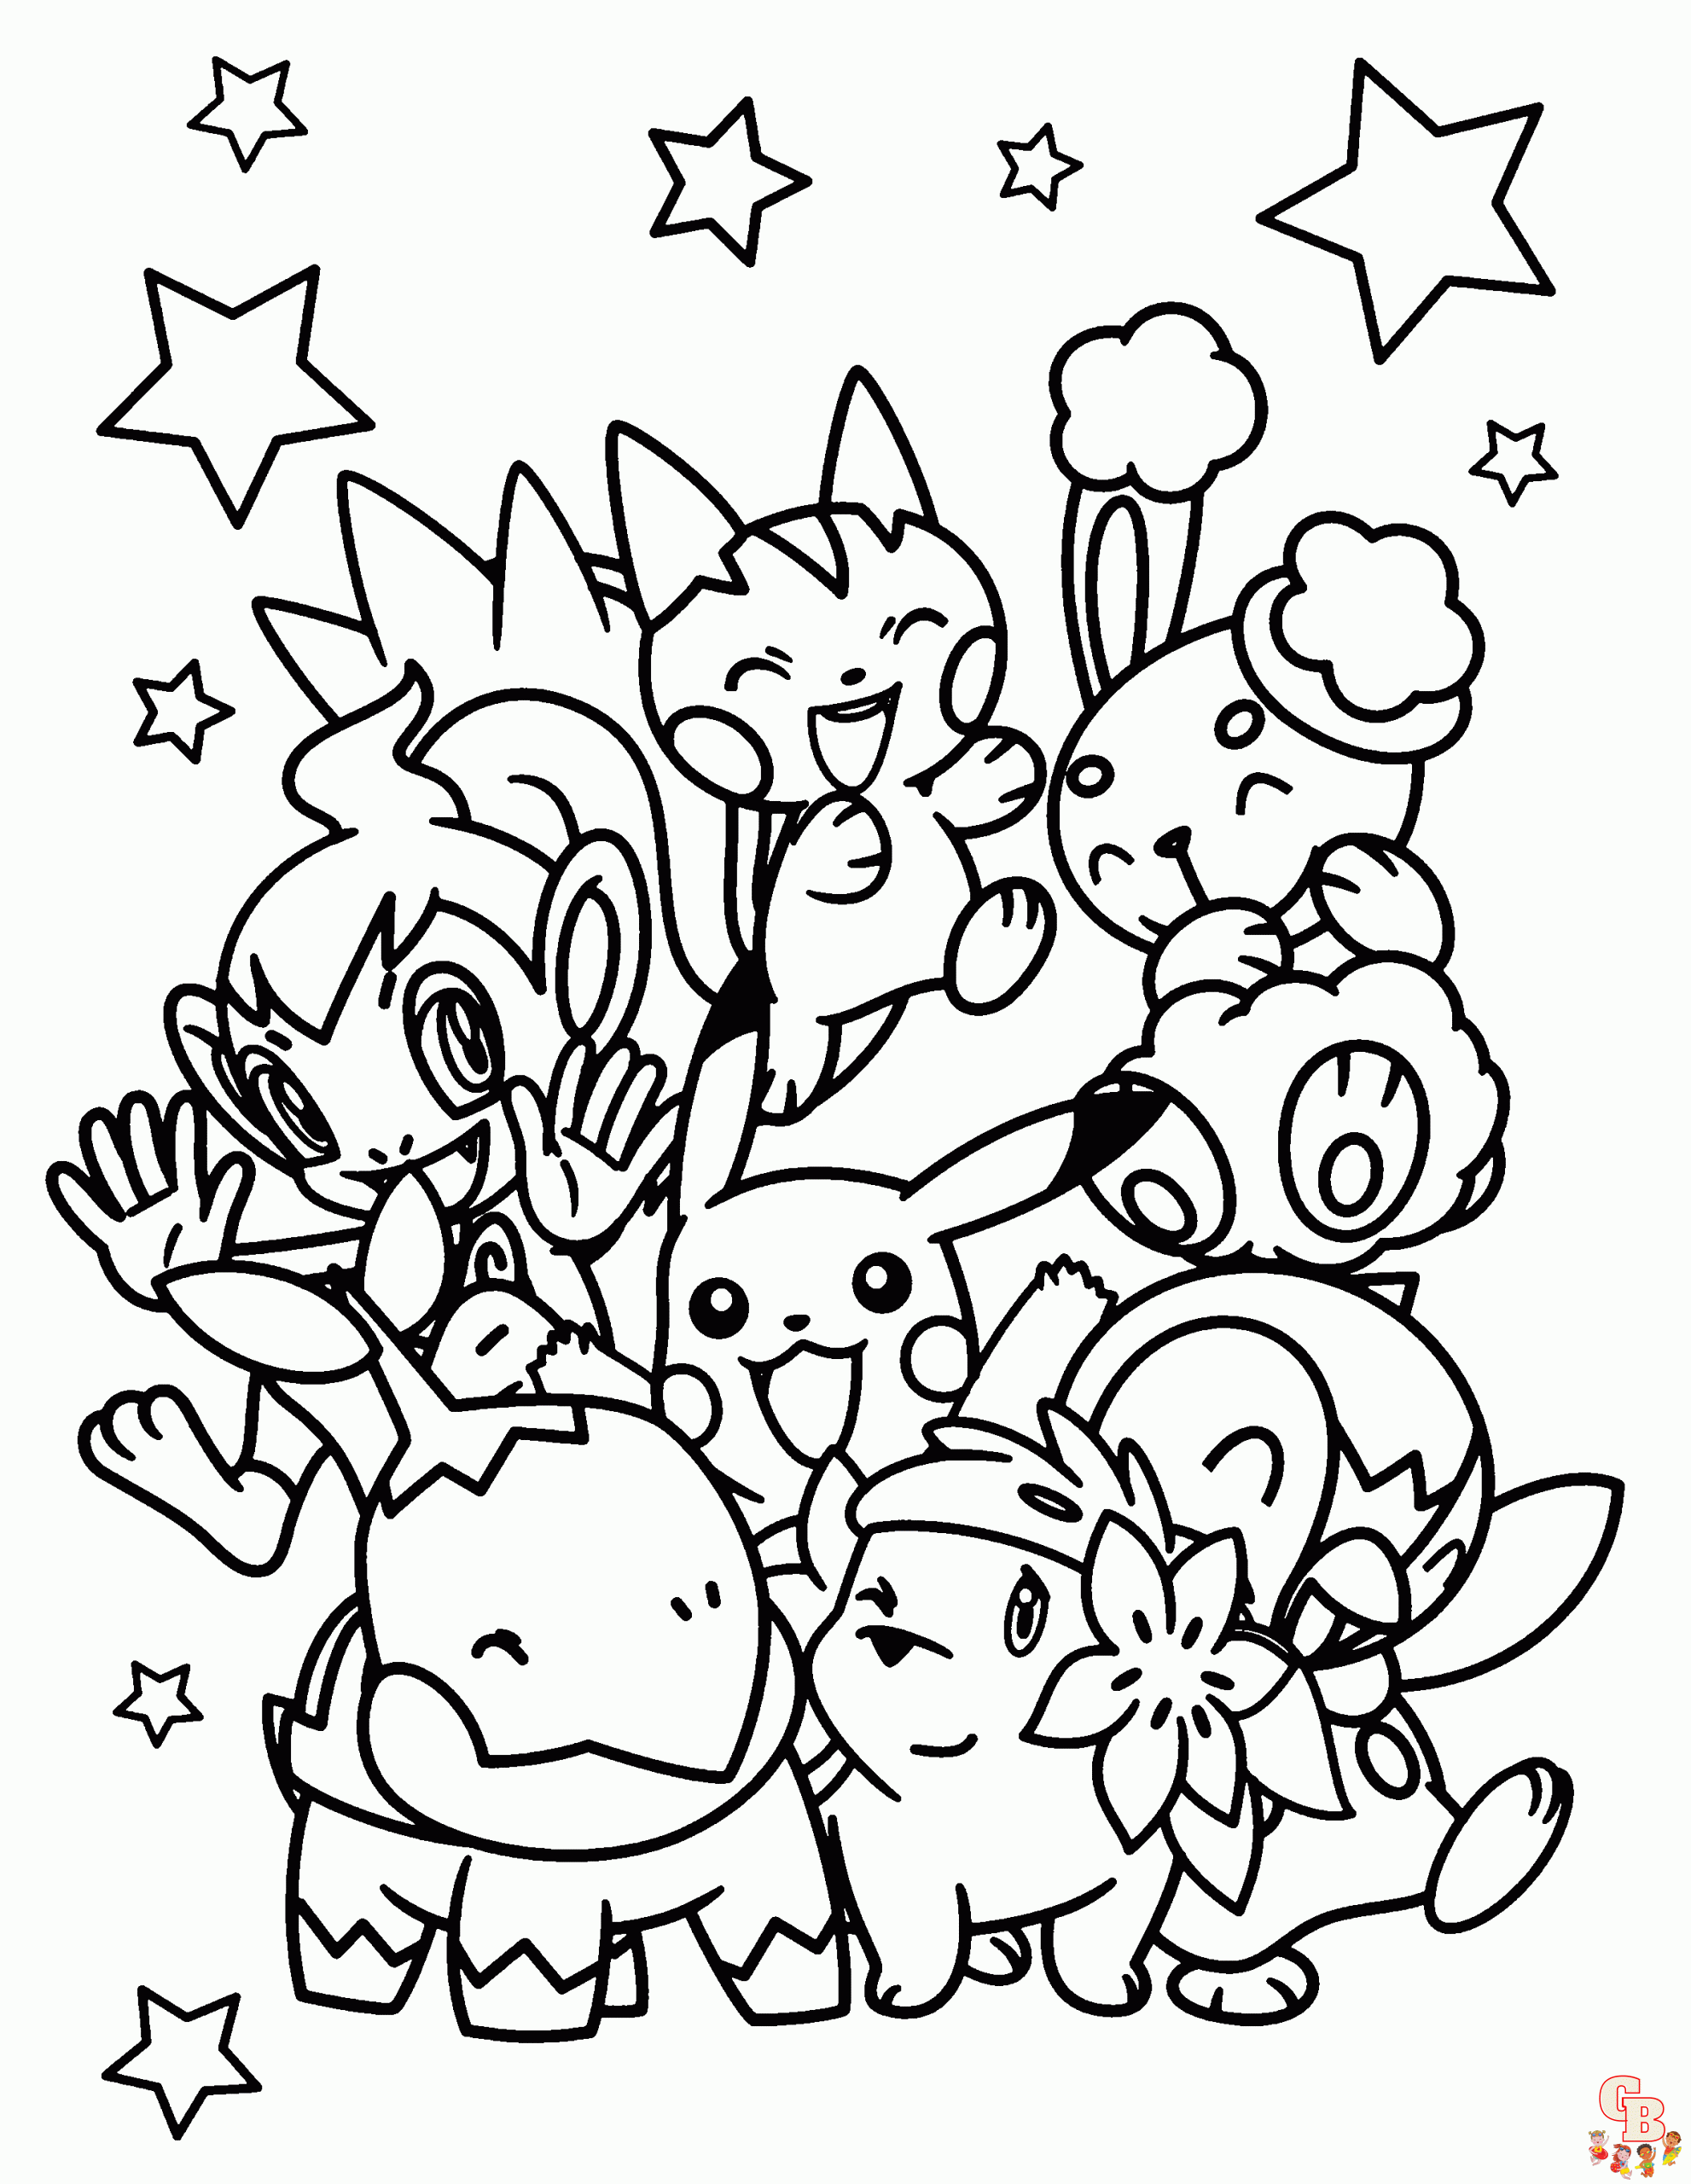 Cute Pokemon coloring pages 8 1